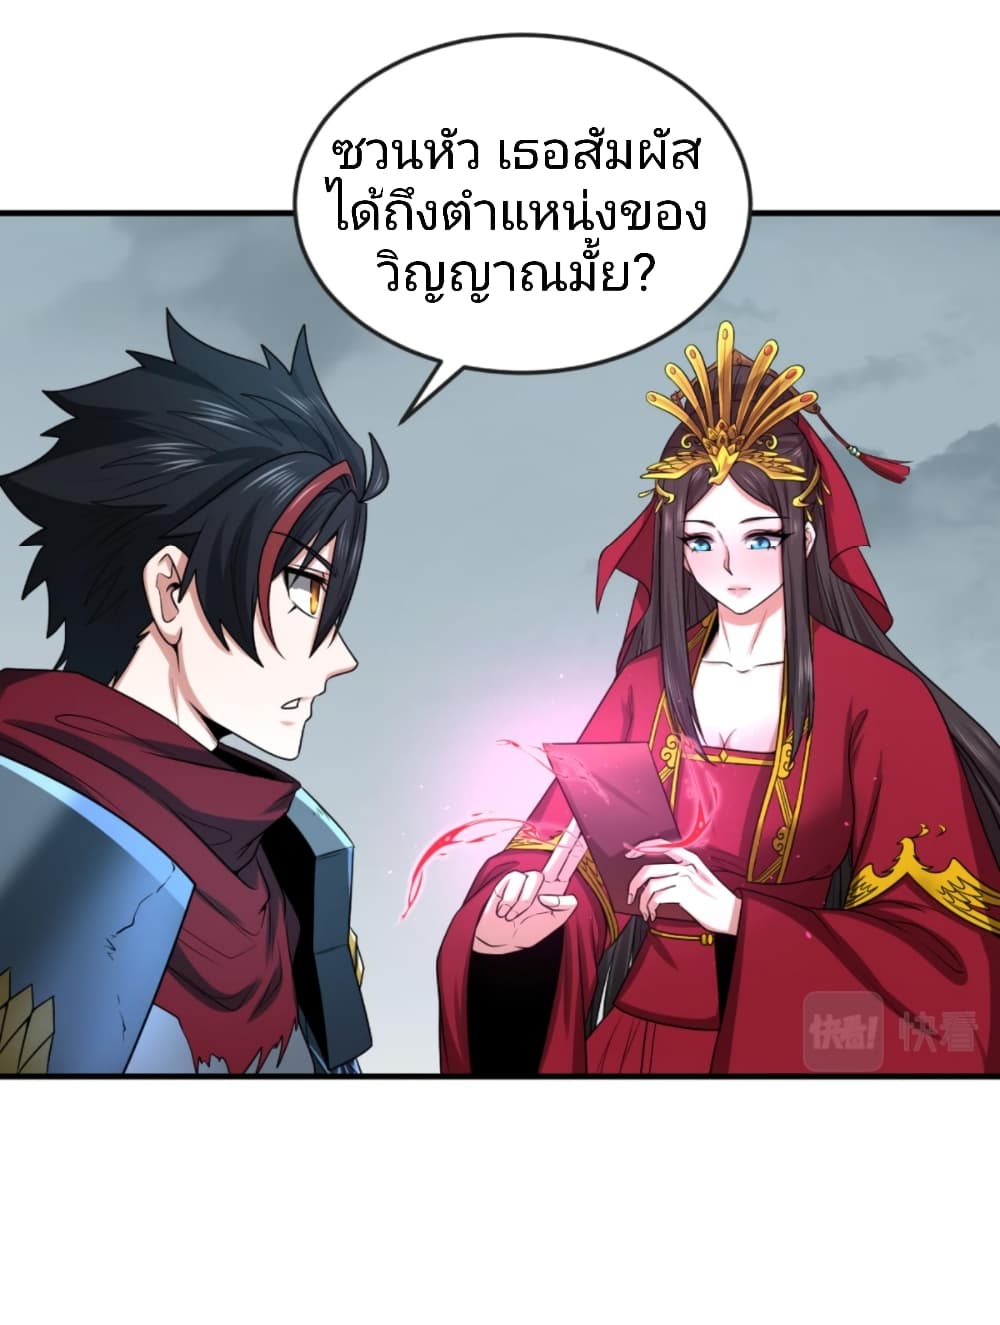 The Age of Ghost Spirits à¸à¸­à¸à¸à¸µà¹ 39 (12)